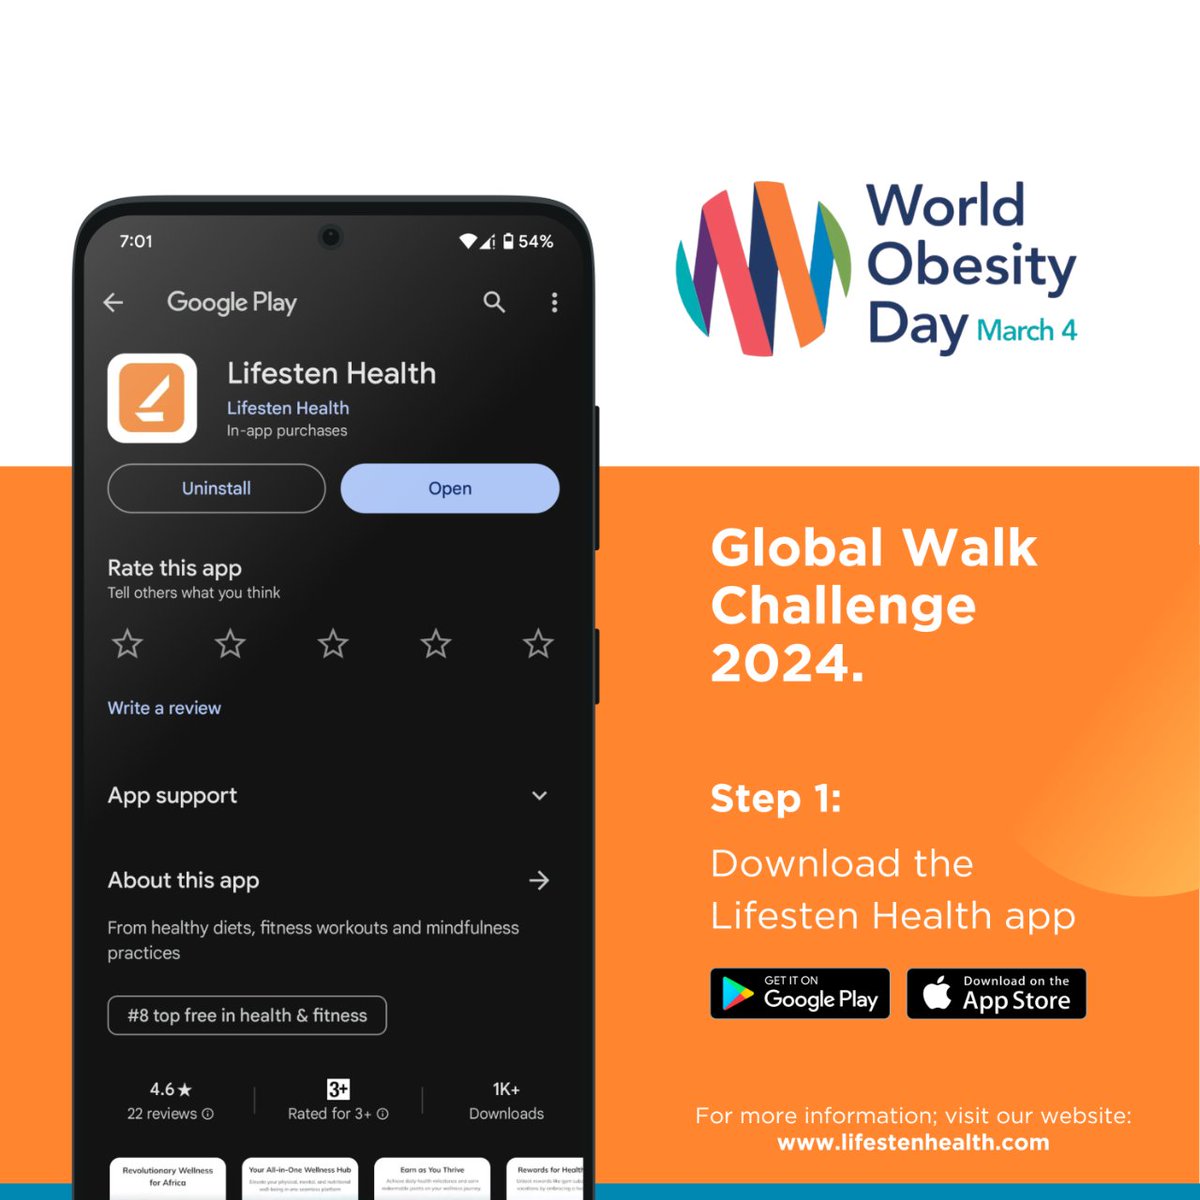 @WorldObesity Are you ready to take on World Obesity Day 2024! To join the Global Walk Challenge, Start by downloading the Lifesten Health app! 📲 iOS: apple.co/3sv1vxs Android: bit.ly/47sl9cn   #WorldObesityDay #WOD2024 🧵 2/7